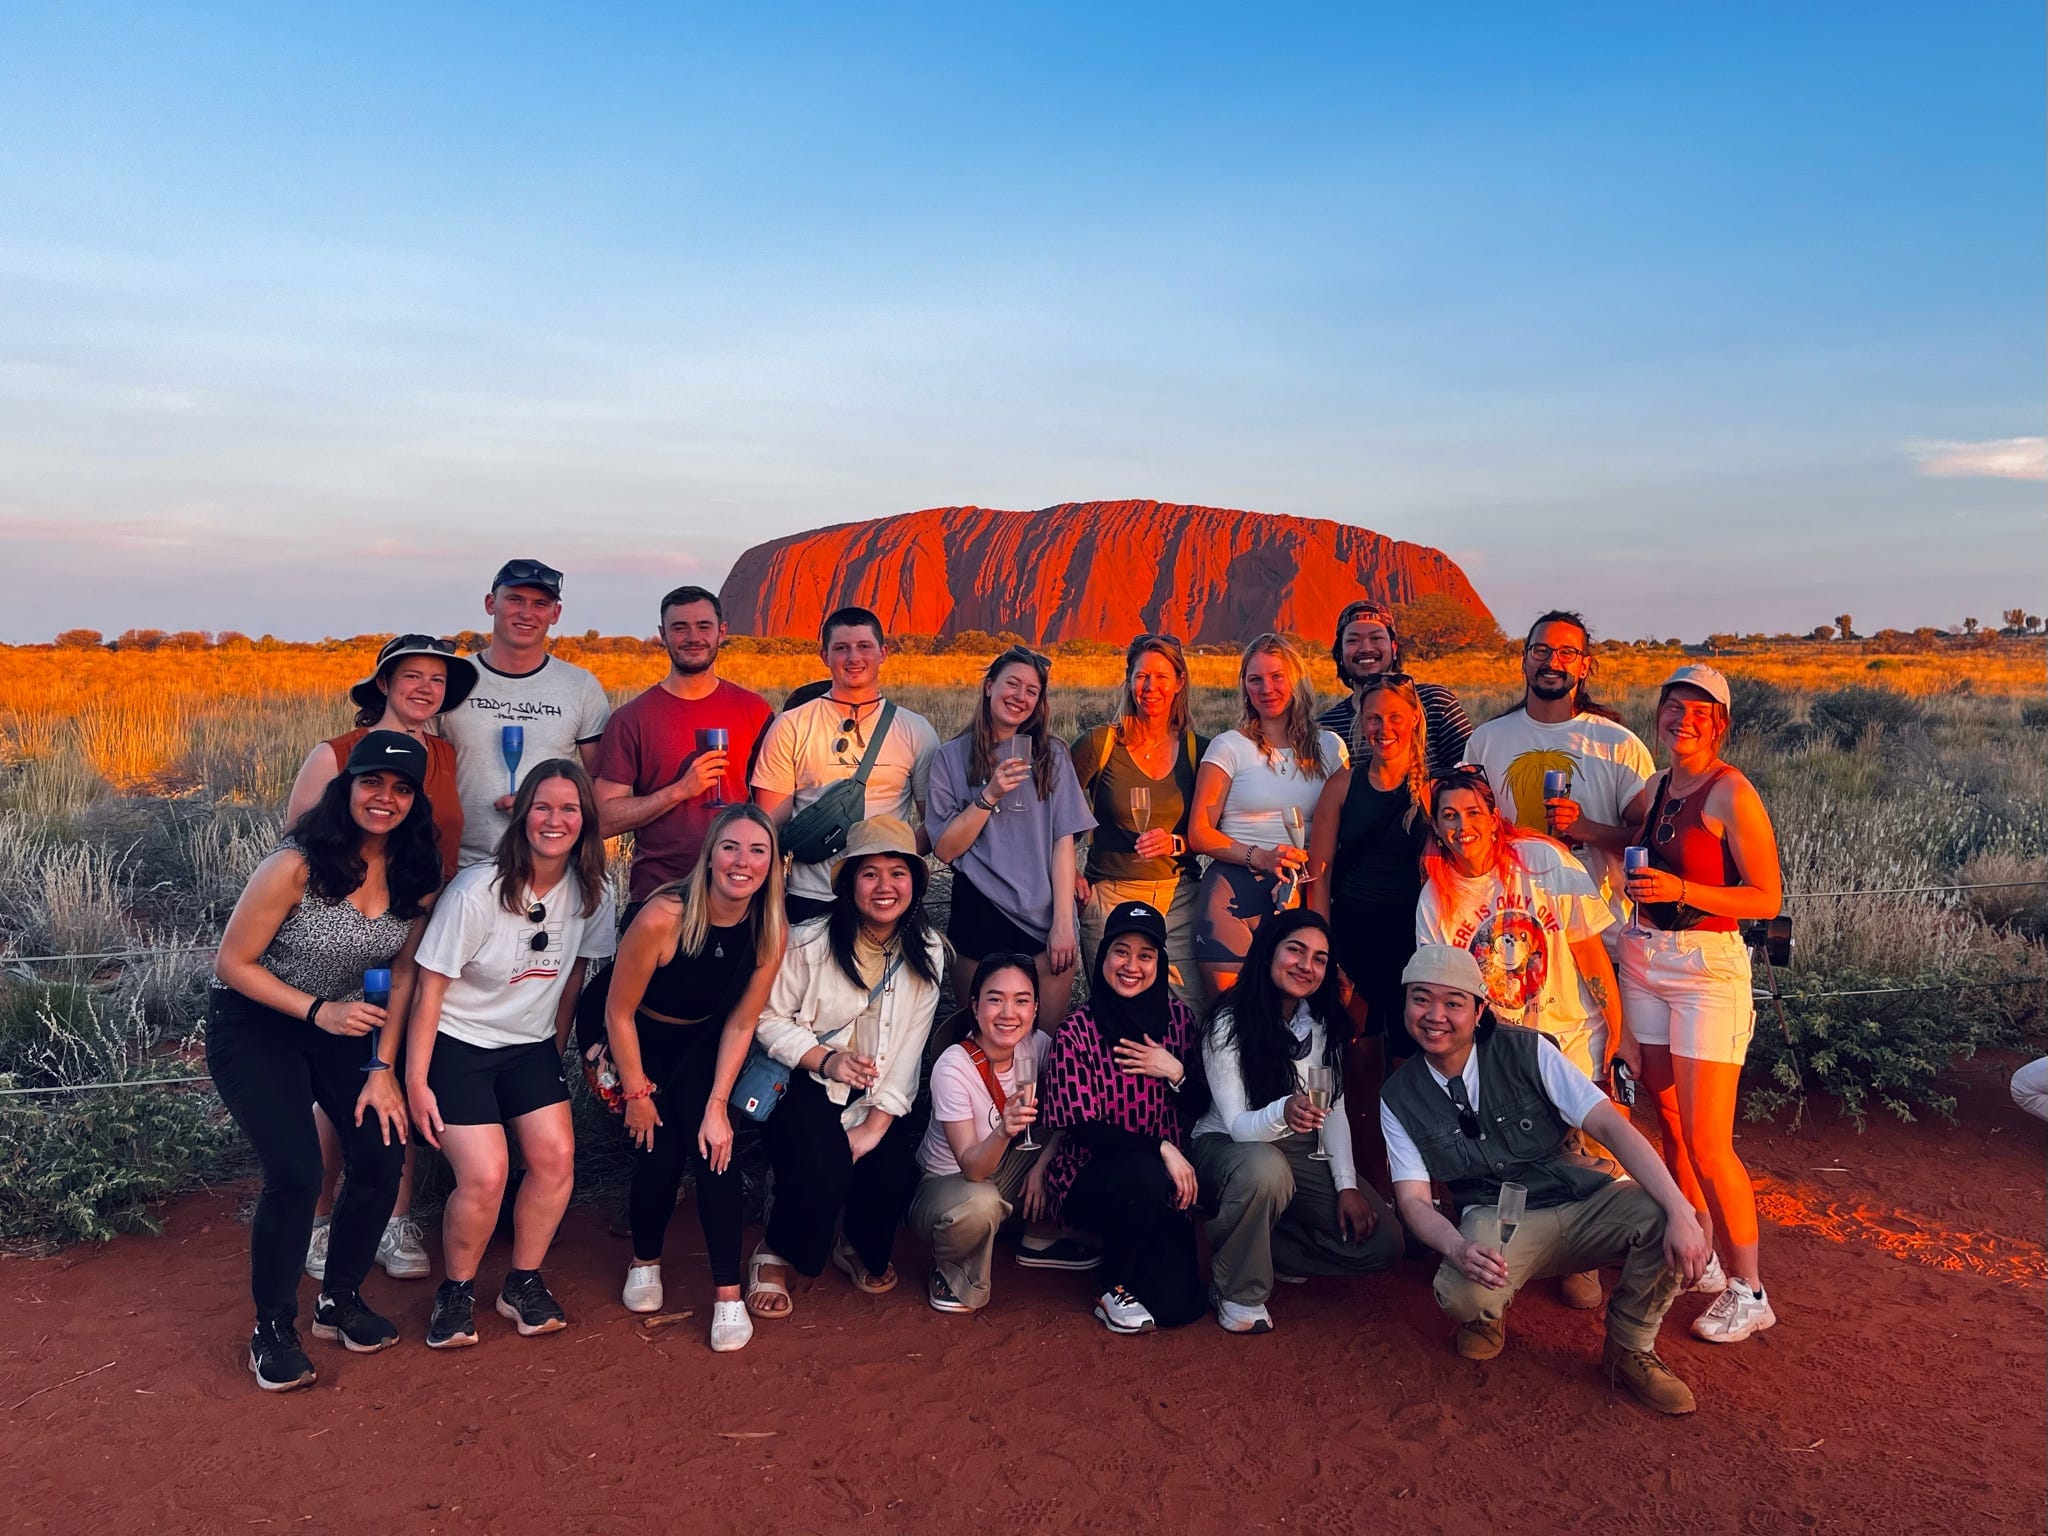 A group of tourists posing together with Uluru in the background during sunset.